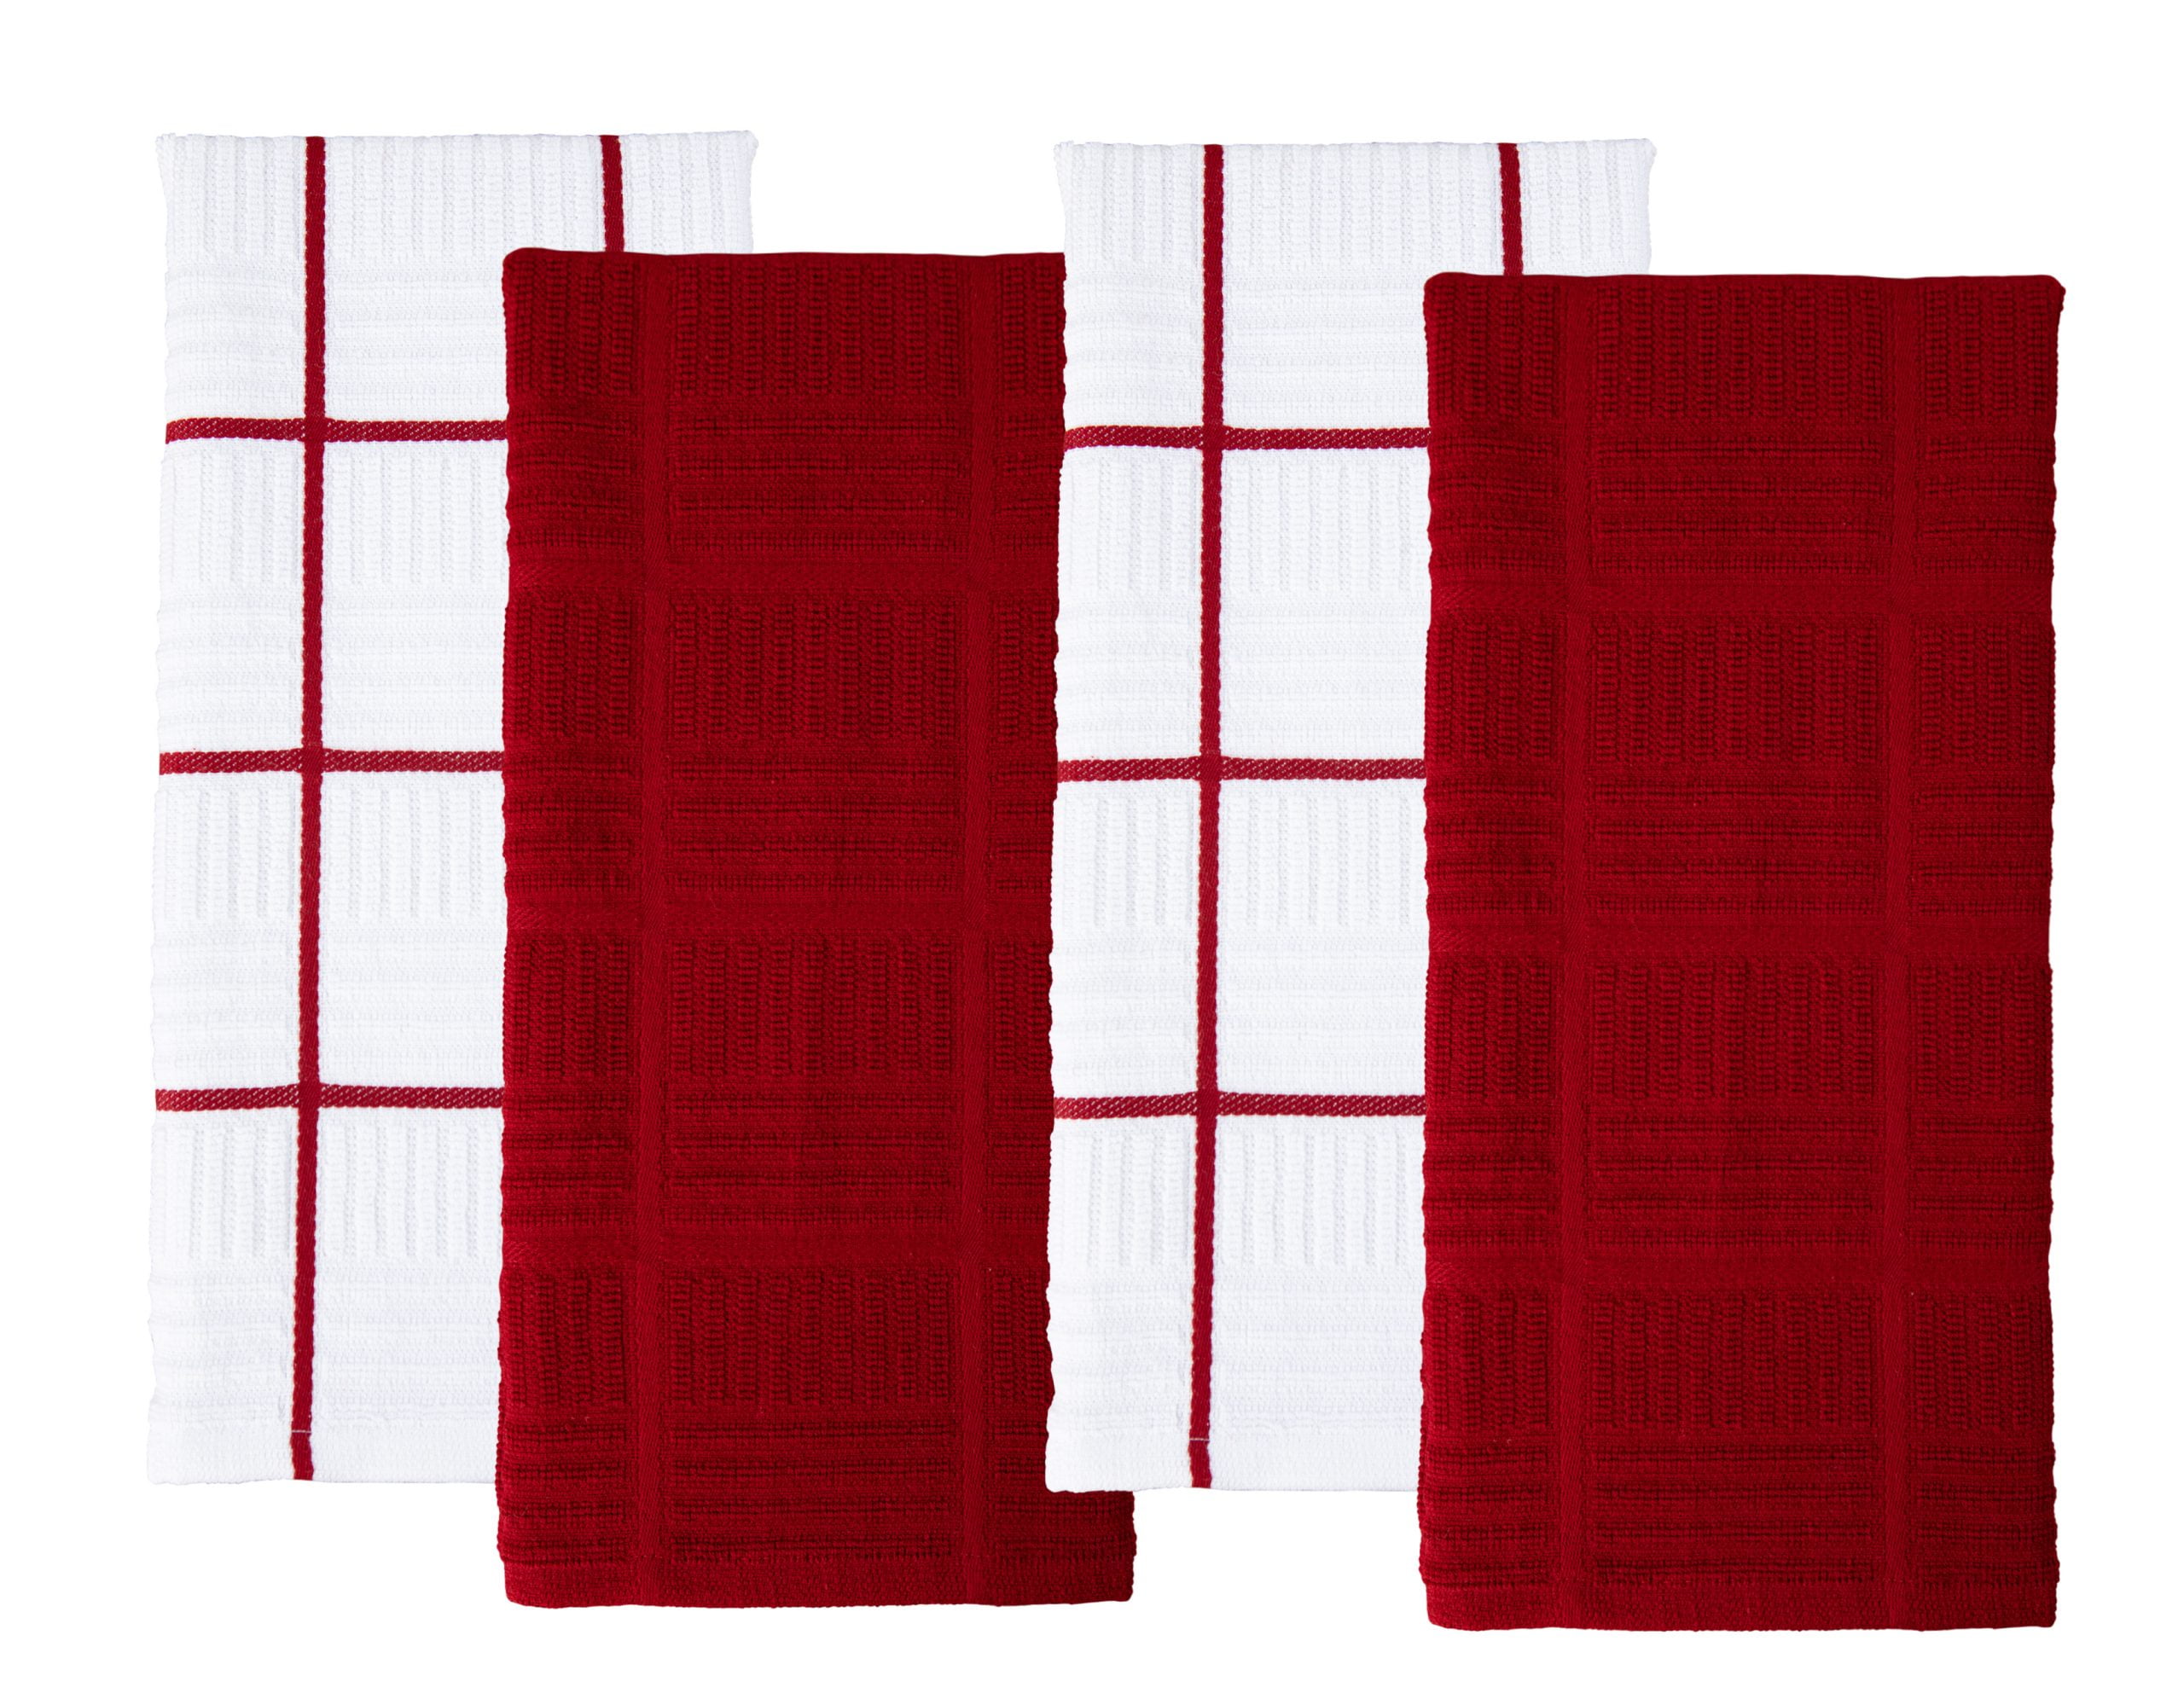 Kitchen Towels Dishcloths 100% Cotton, Set of 8, Red and White Dish Cloth  Towels, Tea Towels, Reusable and Absorbent Cleaning Cloths, Oeko-Tex  Cotton